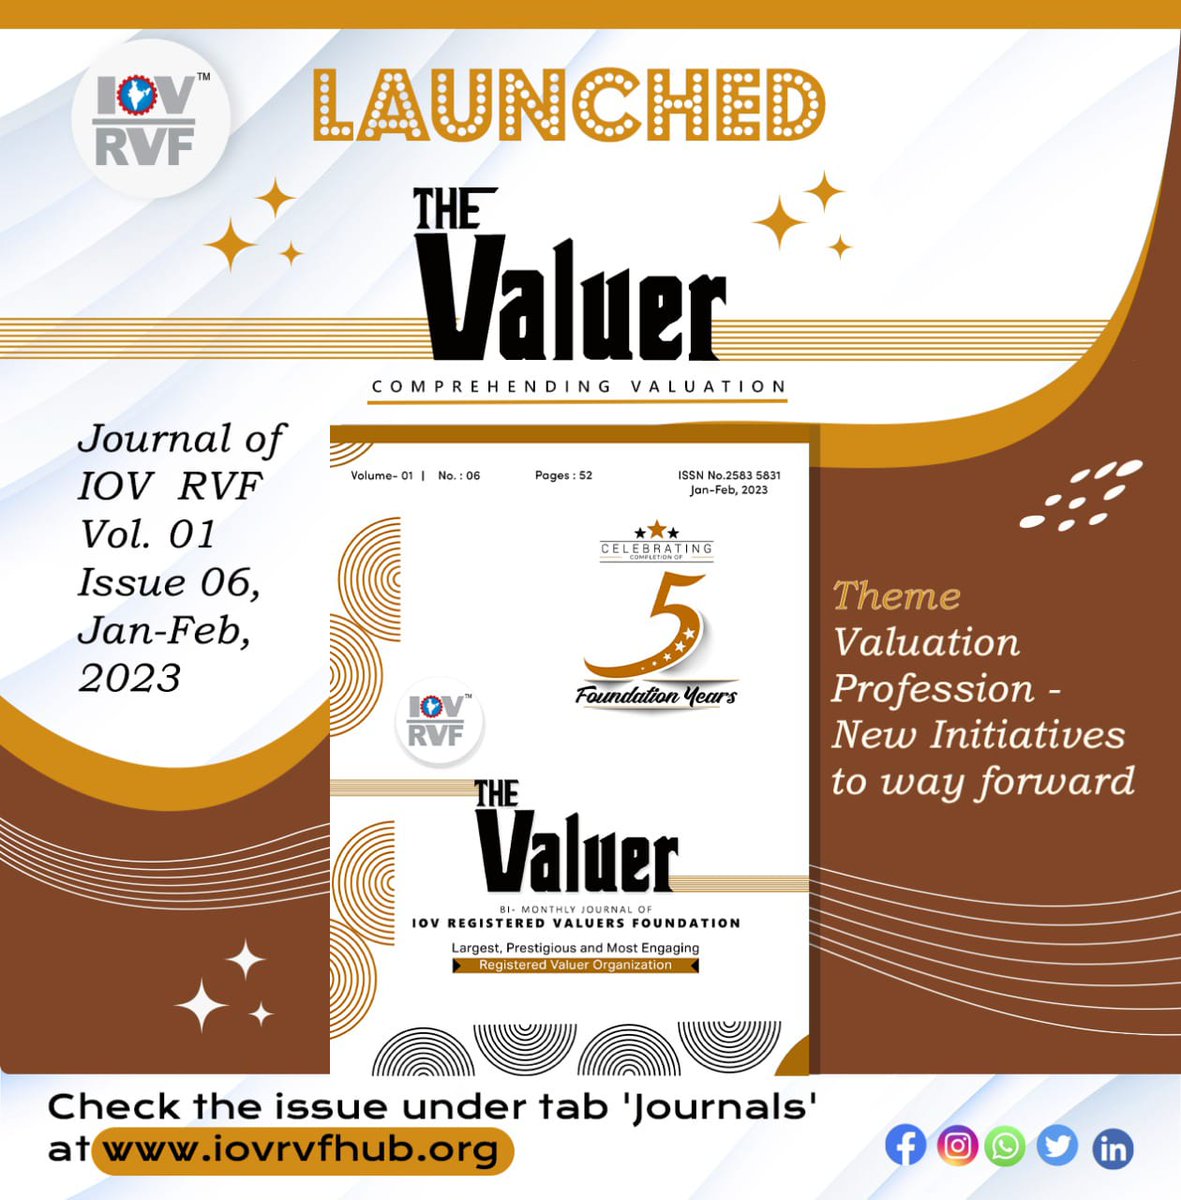 Get the E-Version of our Journal 'IOV RVF The Valuer' for the month of Jan Feb 2023.
Click on this link:- iovrvfhub.org/e_journals_det…

#iov #iovrvf #valuers #valuation #registeredvaluer #thevaluer #valuer #ejournal #newmagazine #journals #journal #magazine #onlinejournal #readnow